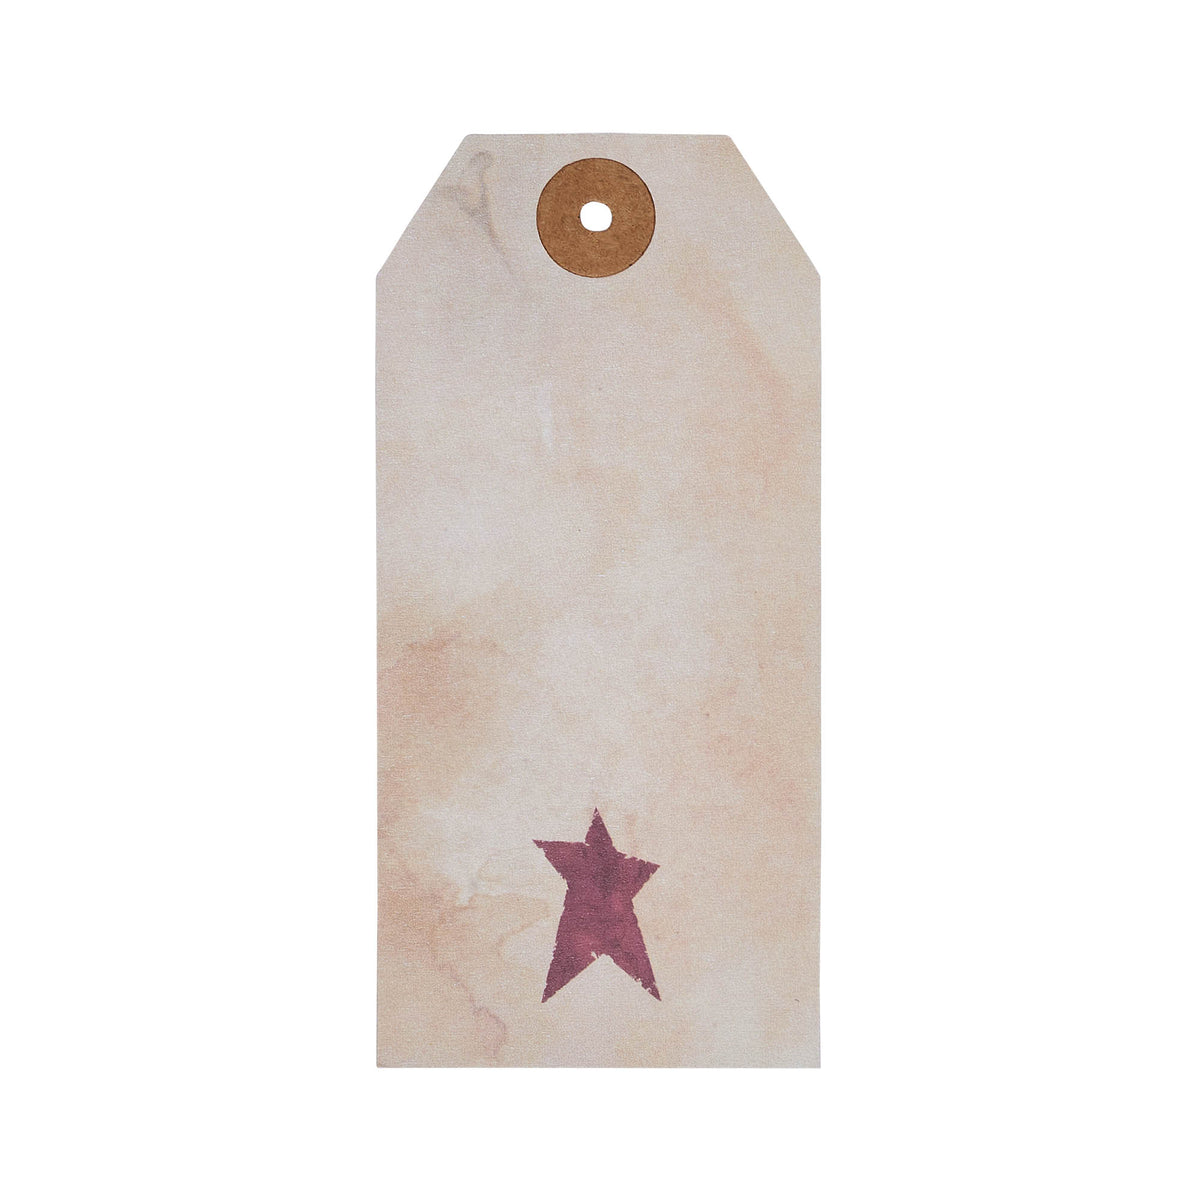 Primitive Star Tea Stained Paper Tag Burgundy 4.75x2.25 w/ Twine Set of 50